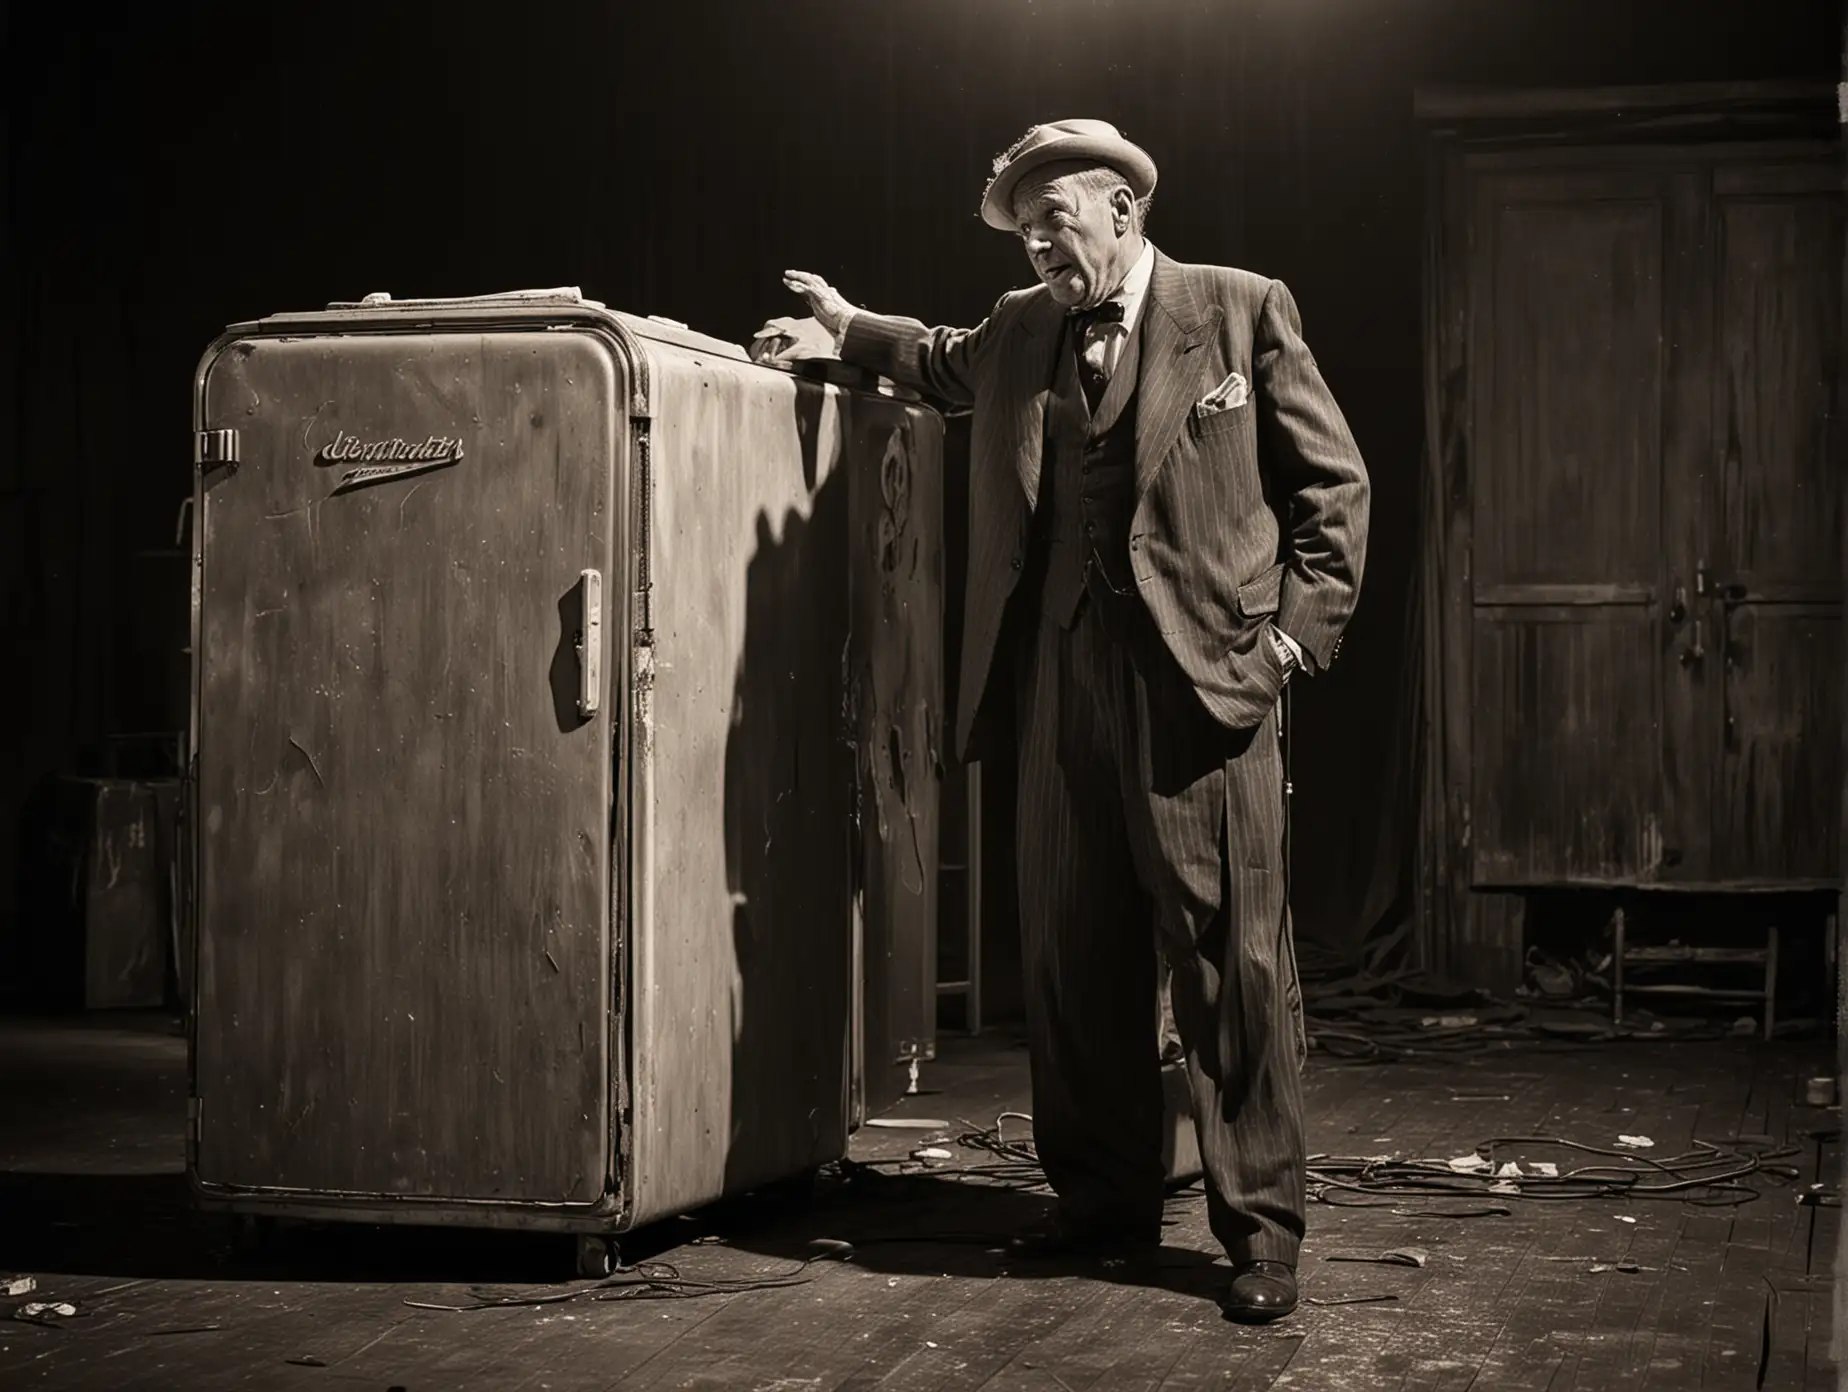 old crooner on stage with a battered old fashioned fridge 